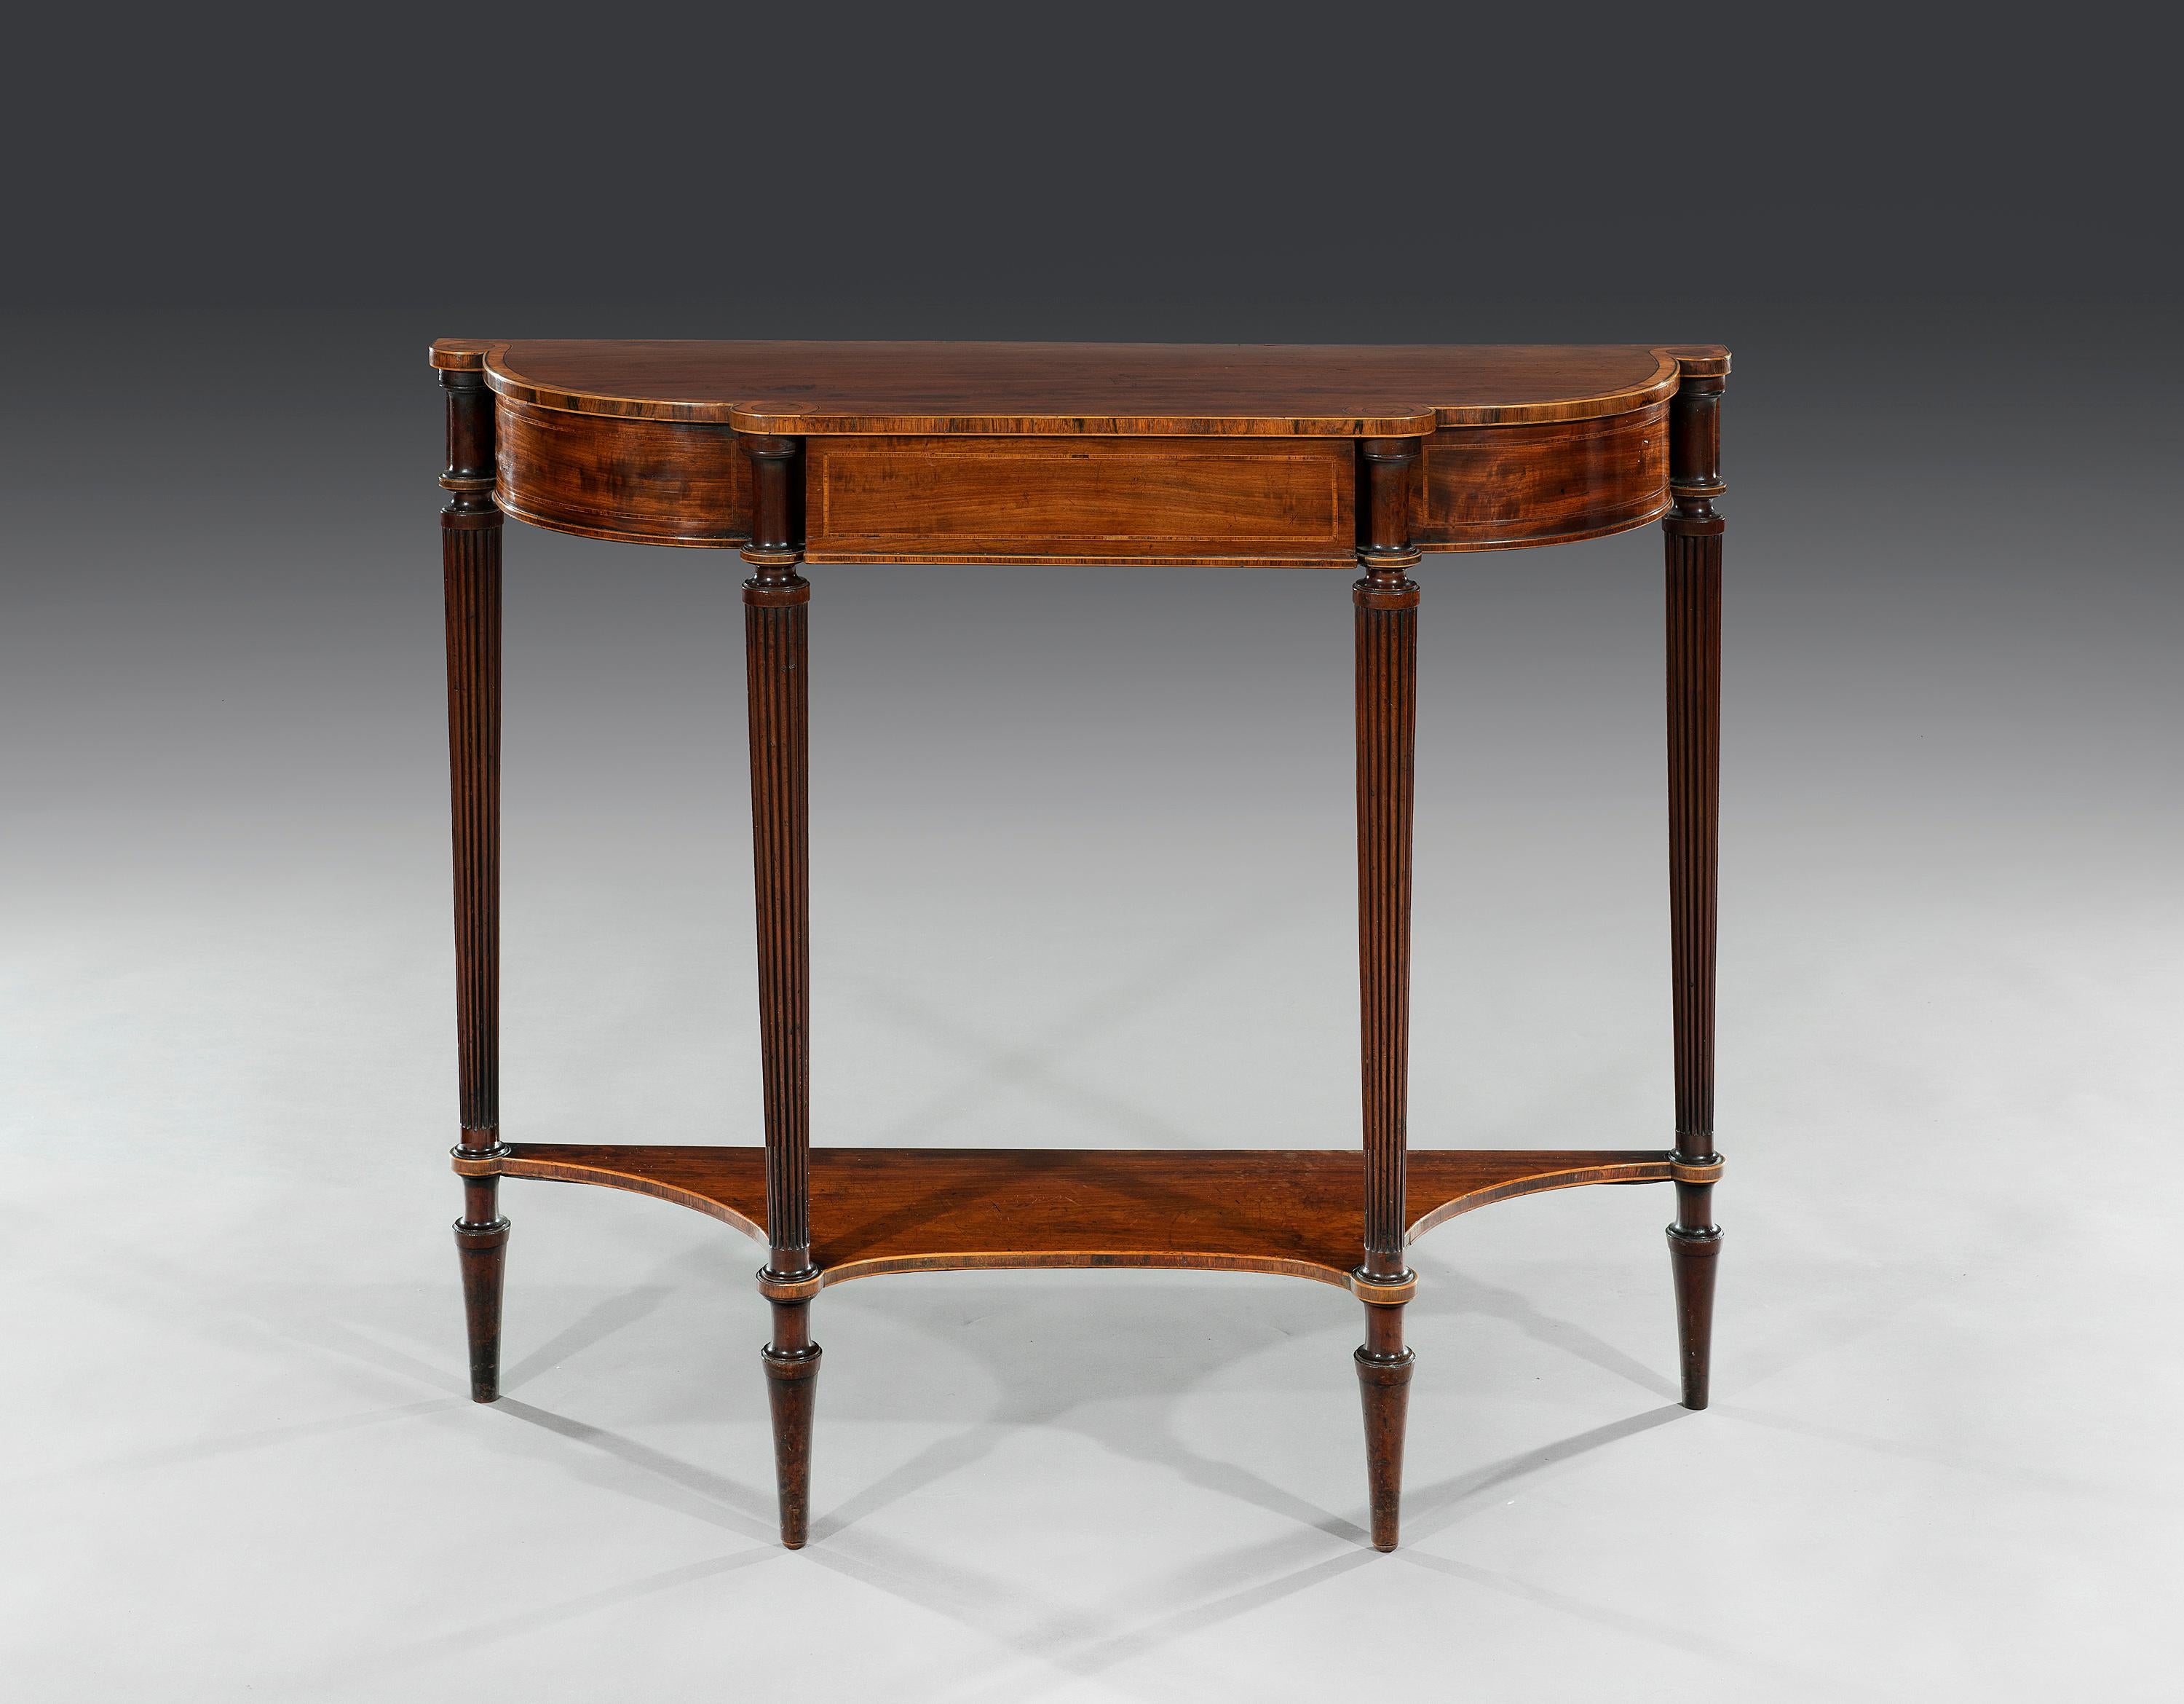 Gillows of Lancaster & London (worked 1730-1903)

George III 18th century period mahogany and rosewood crossbanded demilune pier table
The top is inlaid with satinwood with ebonized lines, the shaped rectangular top with inset roundels to the